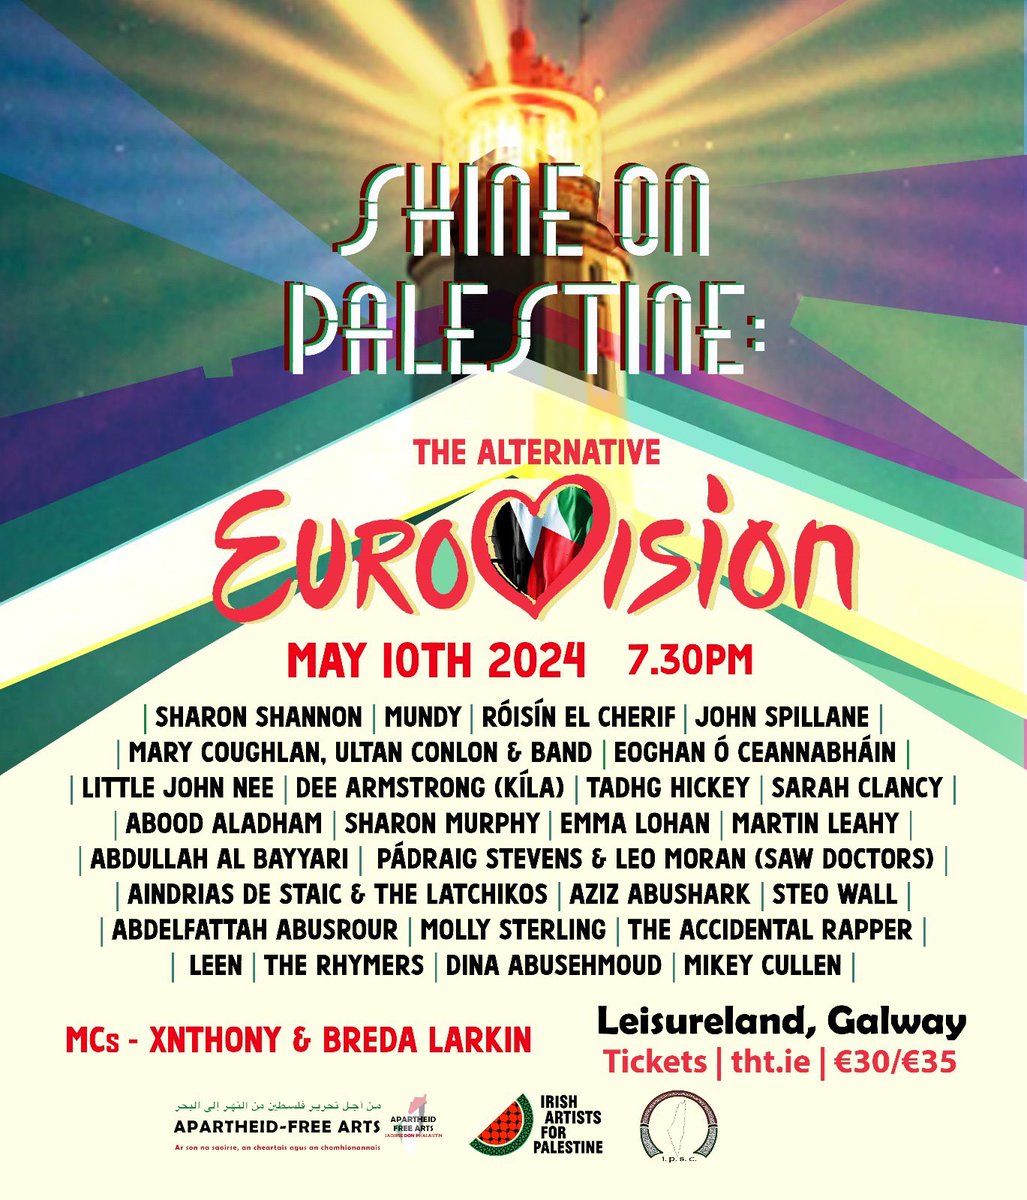 Shine on Palestine - an alternative Eurovision event takes place in Leisureland tonight. The line-up features Sharon Shannon, Mary Coughlan, Little John Nee, Tadhg Hickey and more. Tickets available here: tht.ticketsolve.com/ticketbooth/sh…